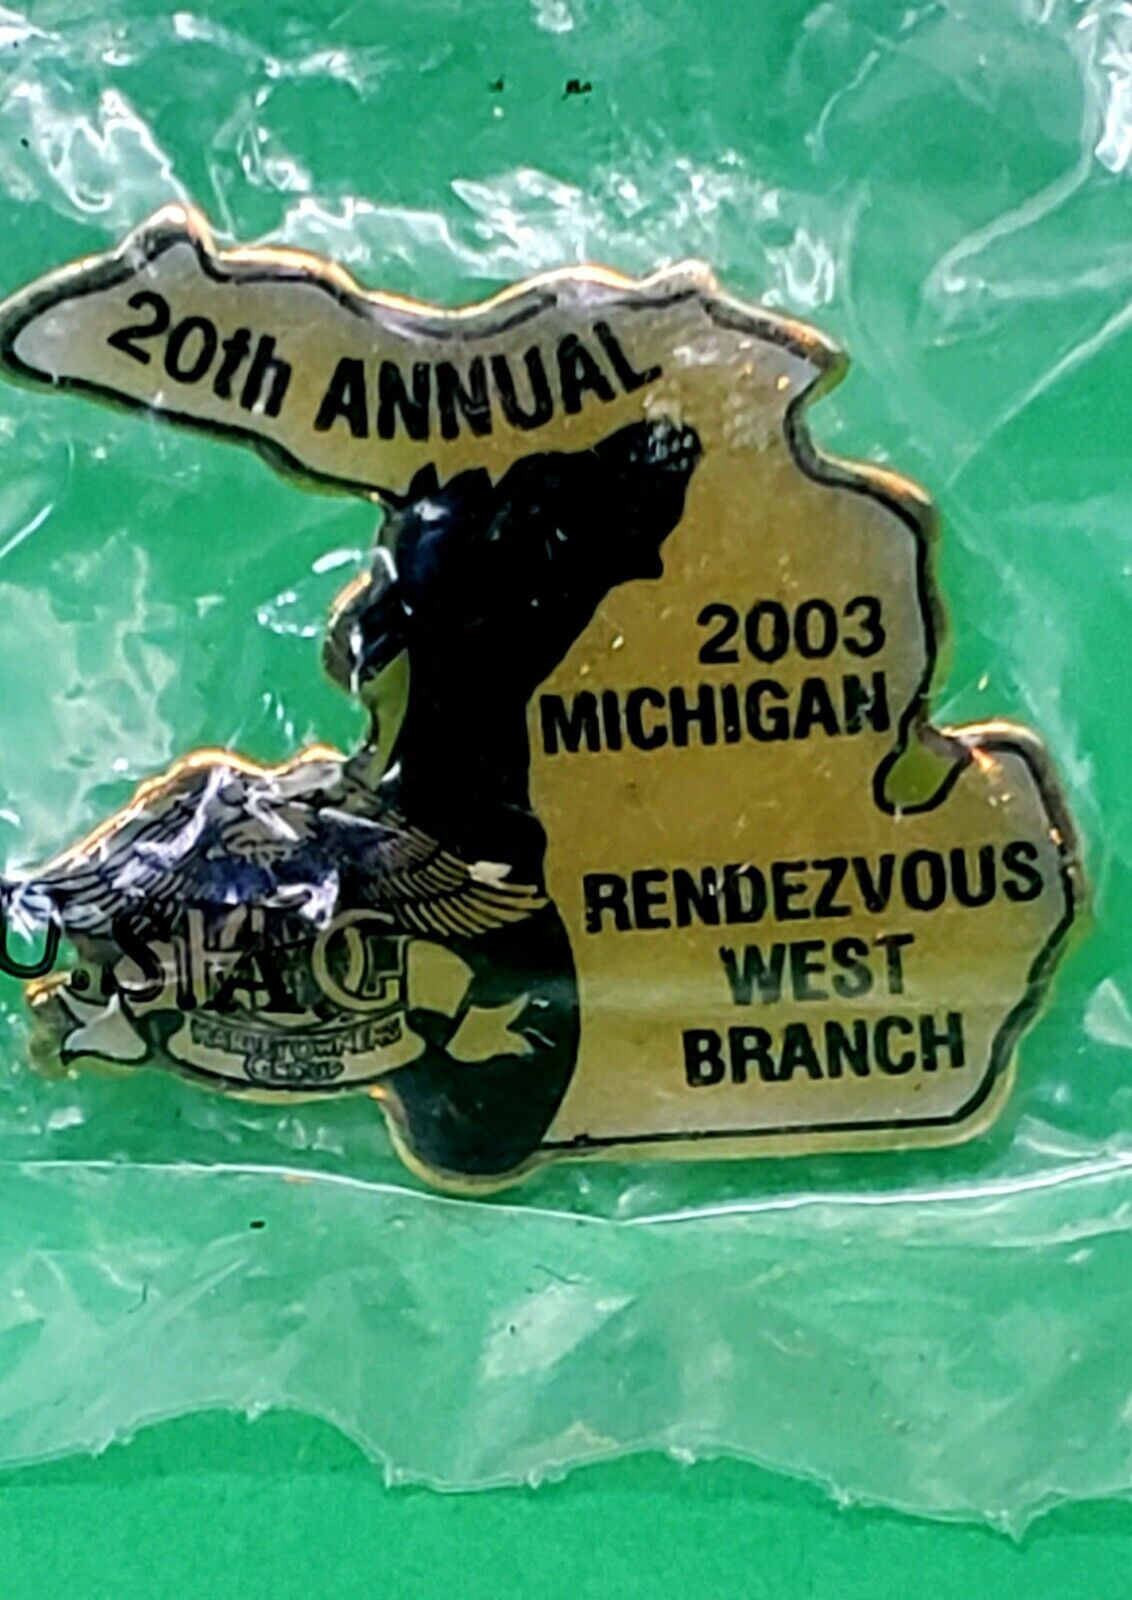 20th Annual 2003 Michigan Rendezvous West Branch HOG (Harley Owners Group) Pin